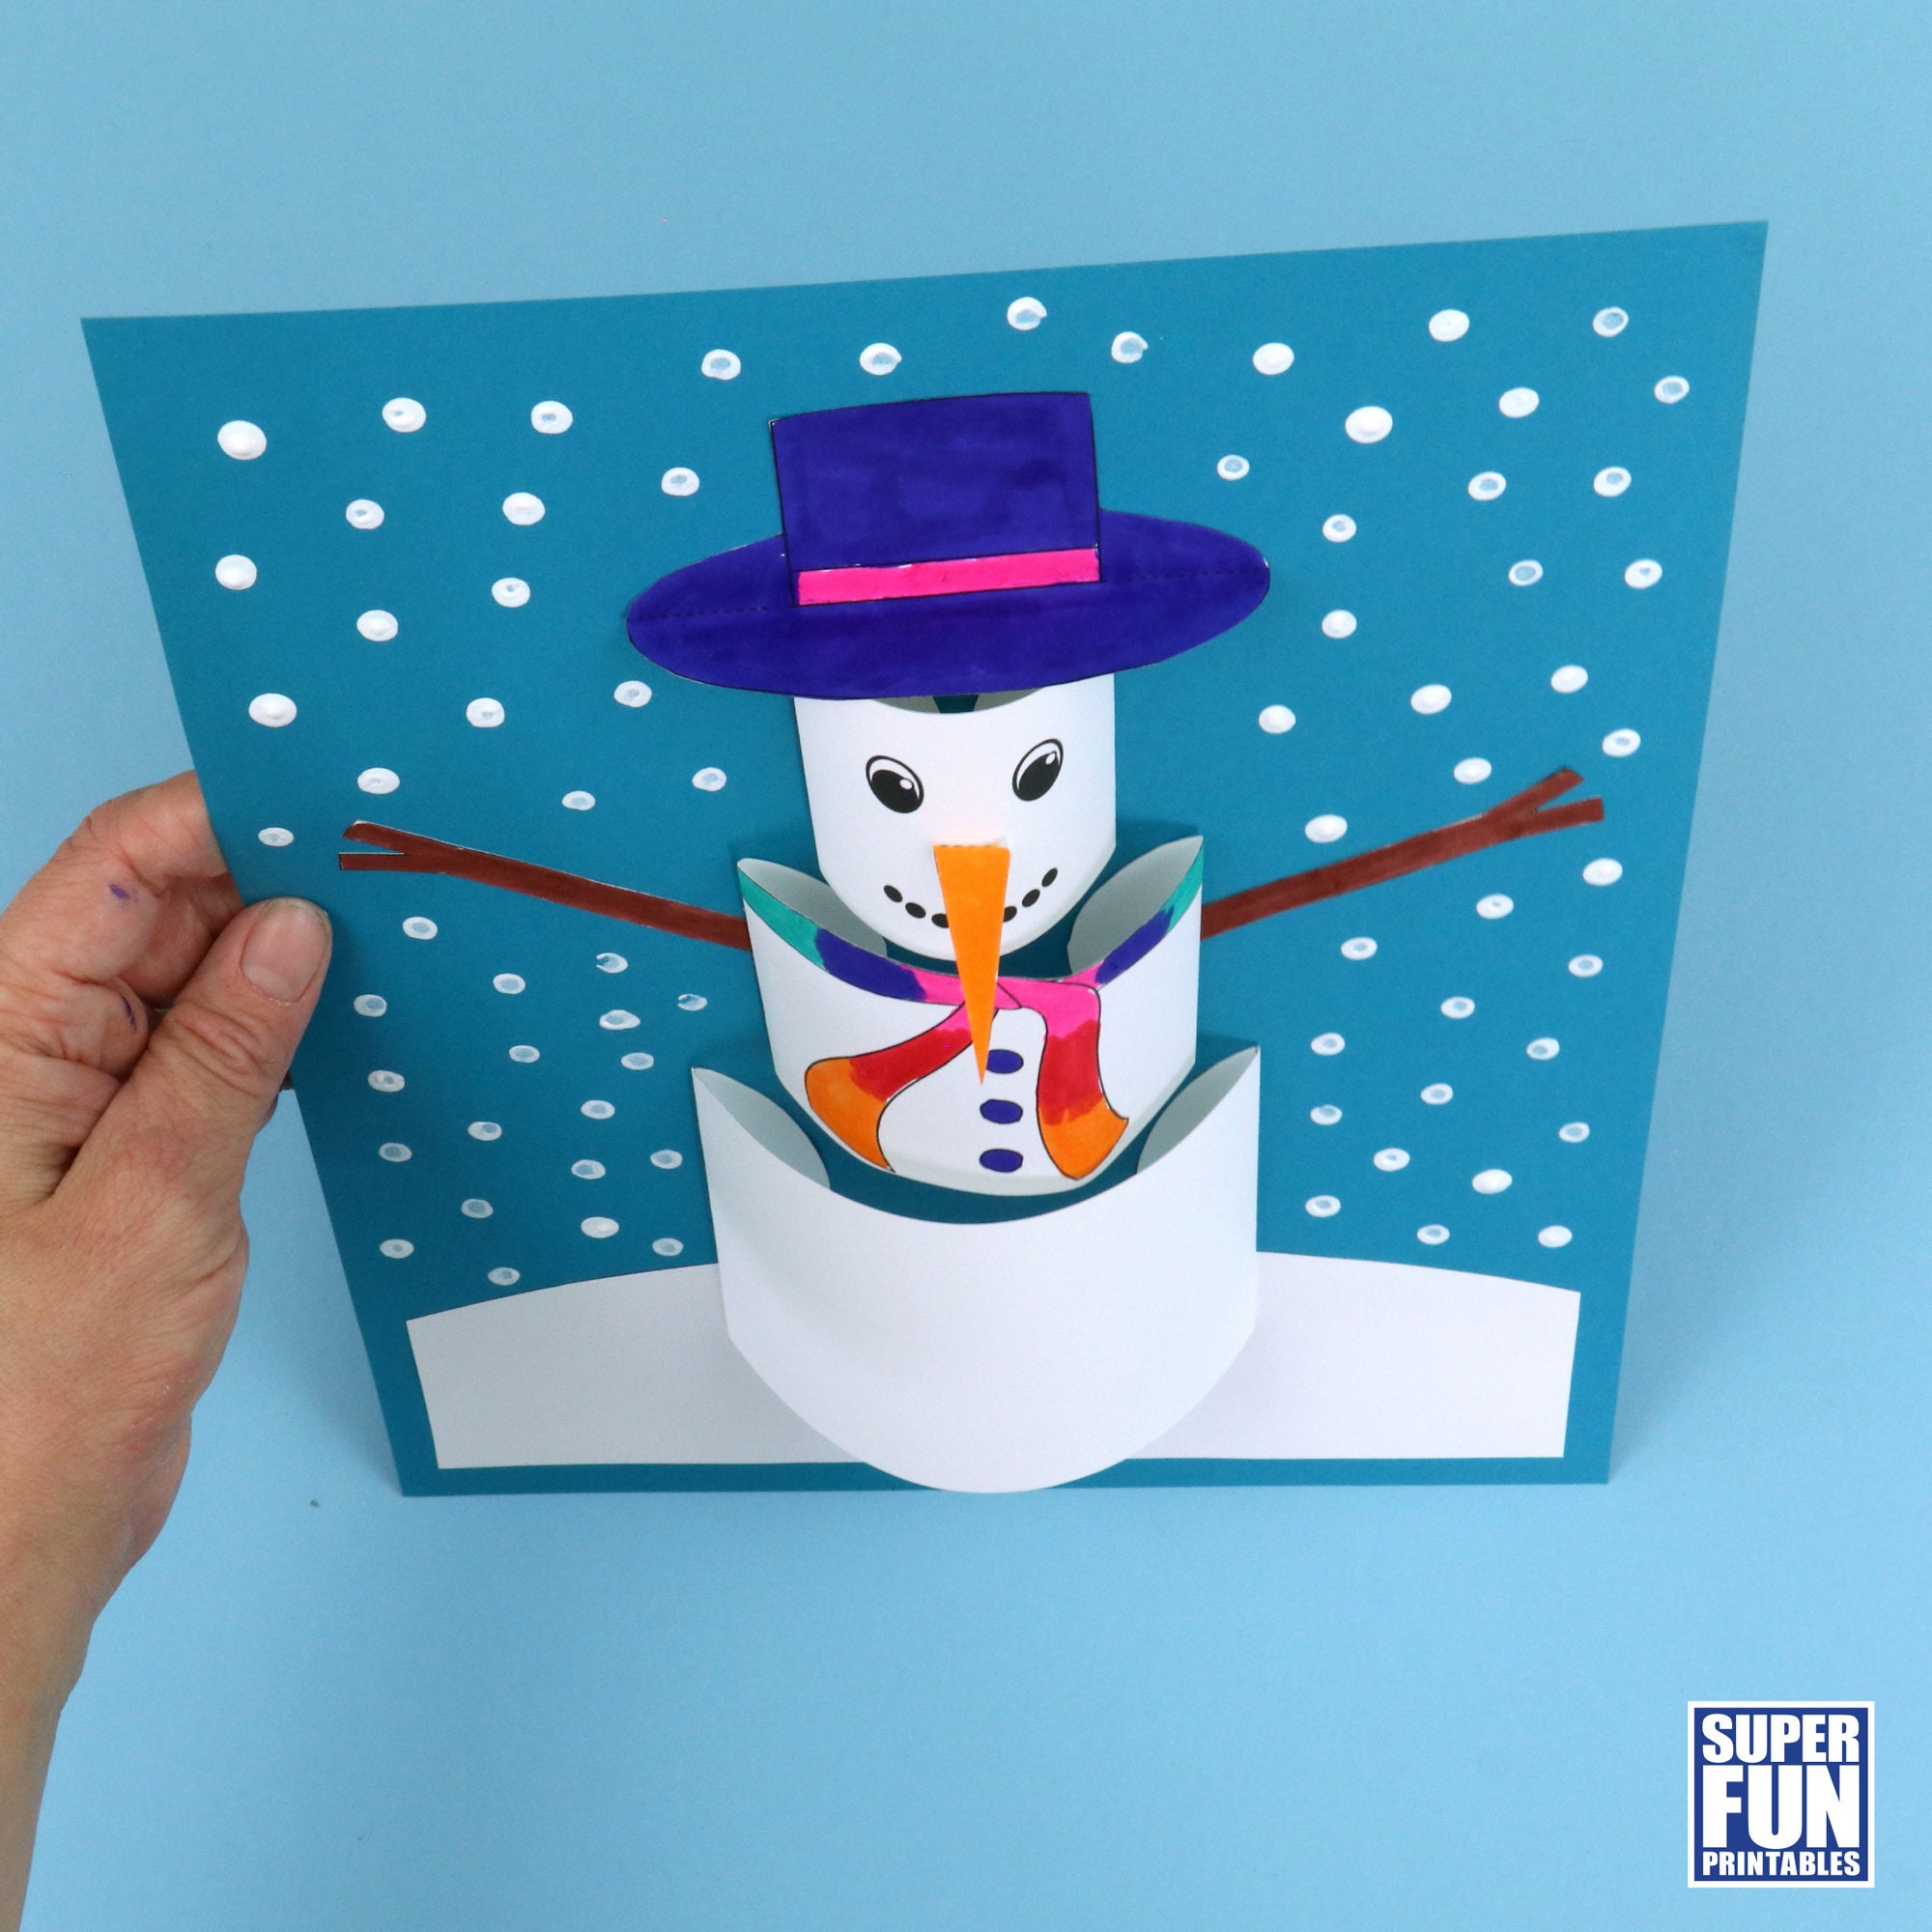 The Happiest Paper Snowman Craft for Kids